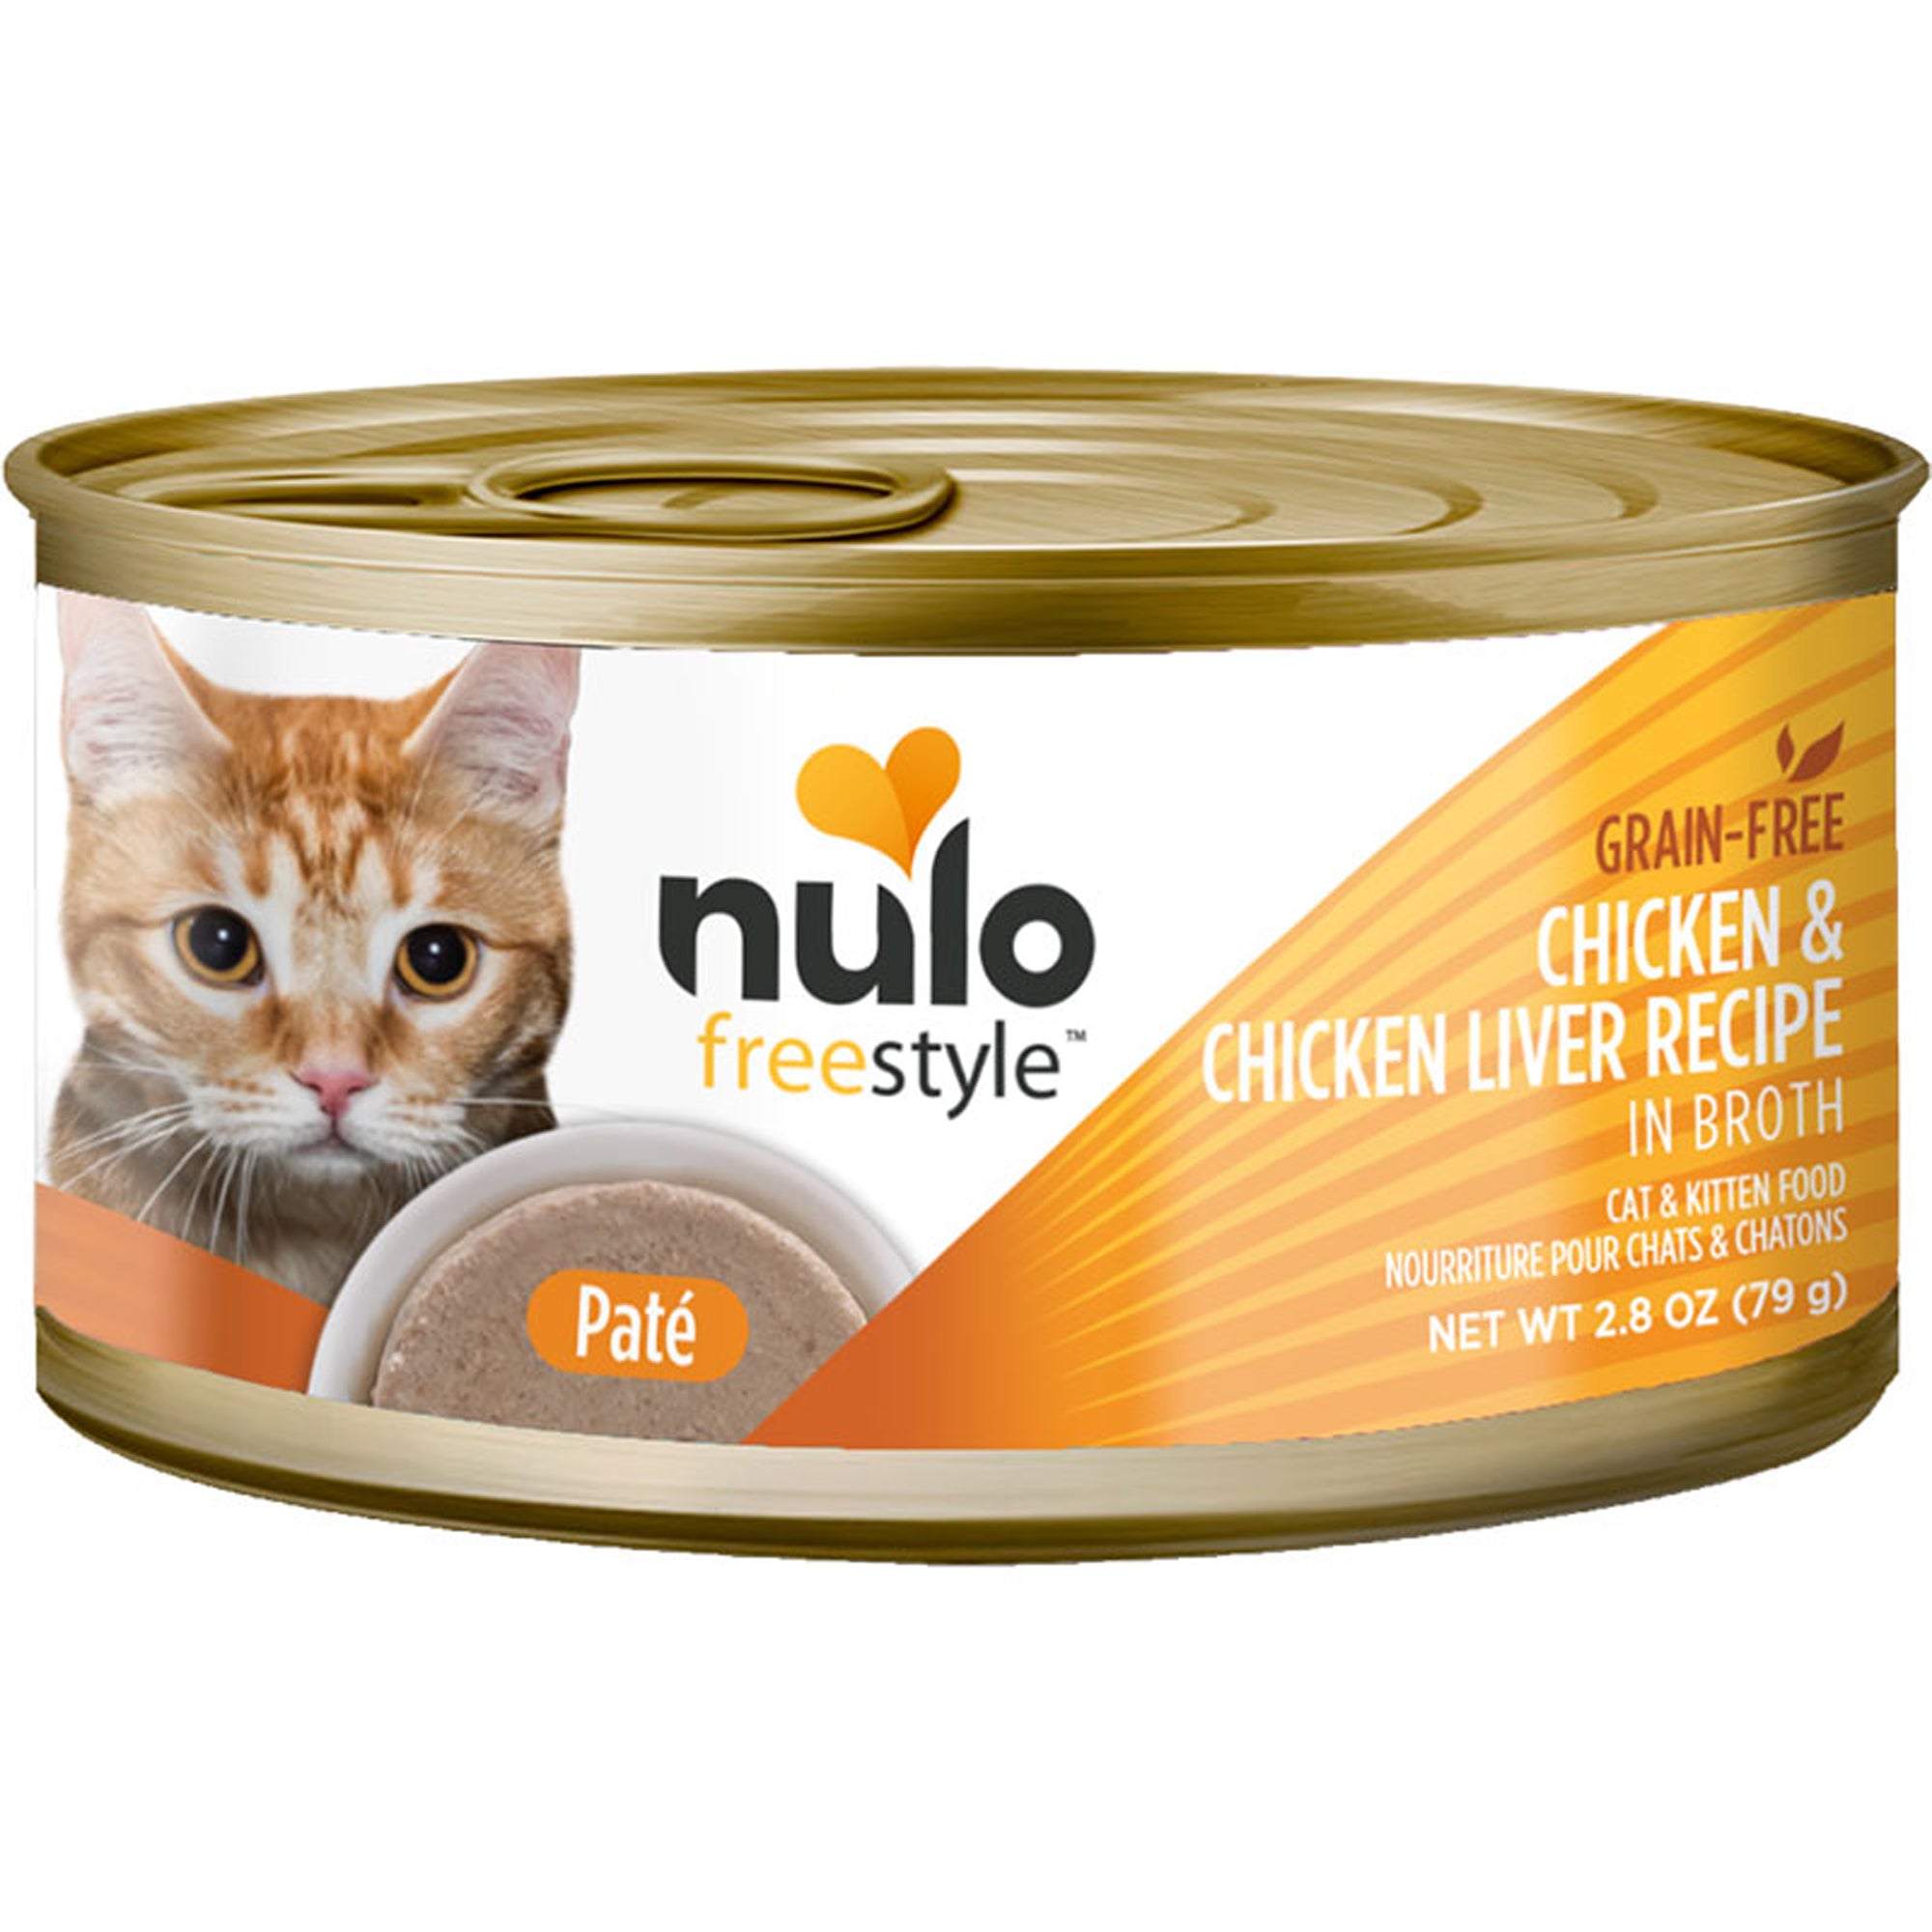 Freestyle Smooth Pate Grain Free Wet Cat Food by Nulo, 2.8oz